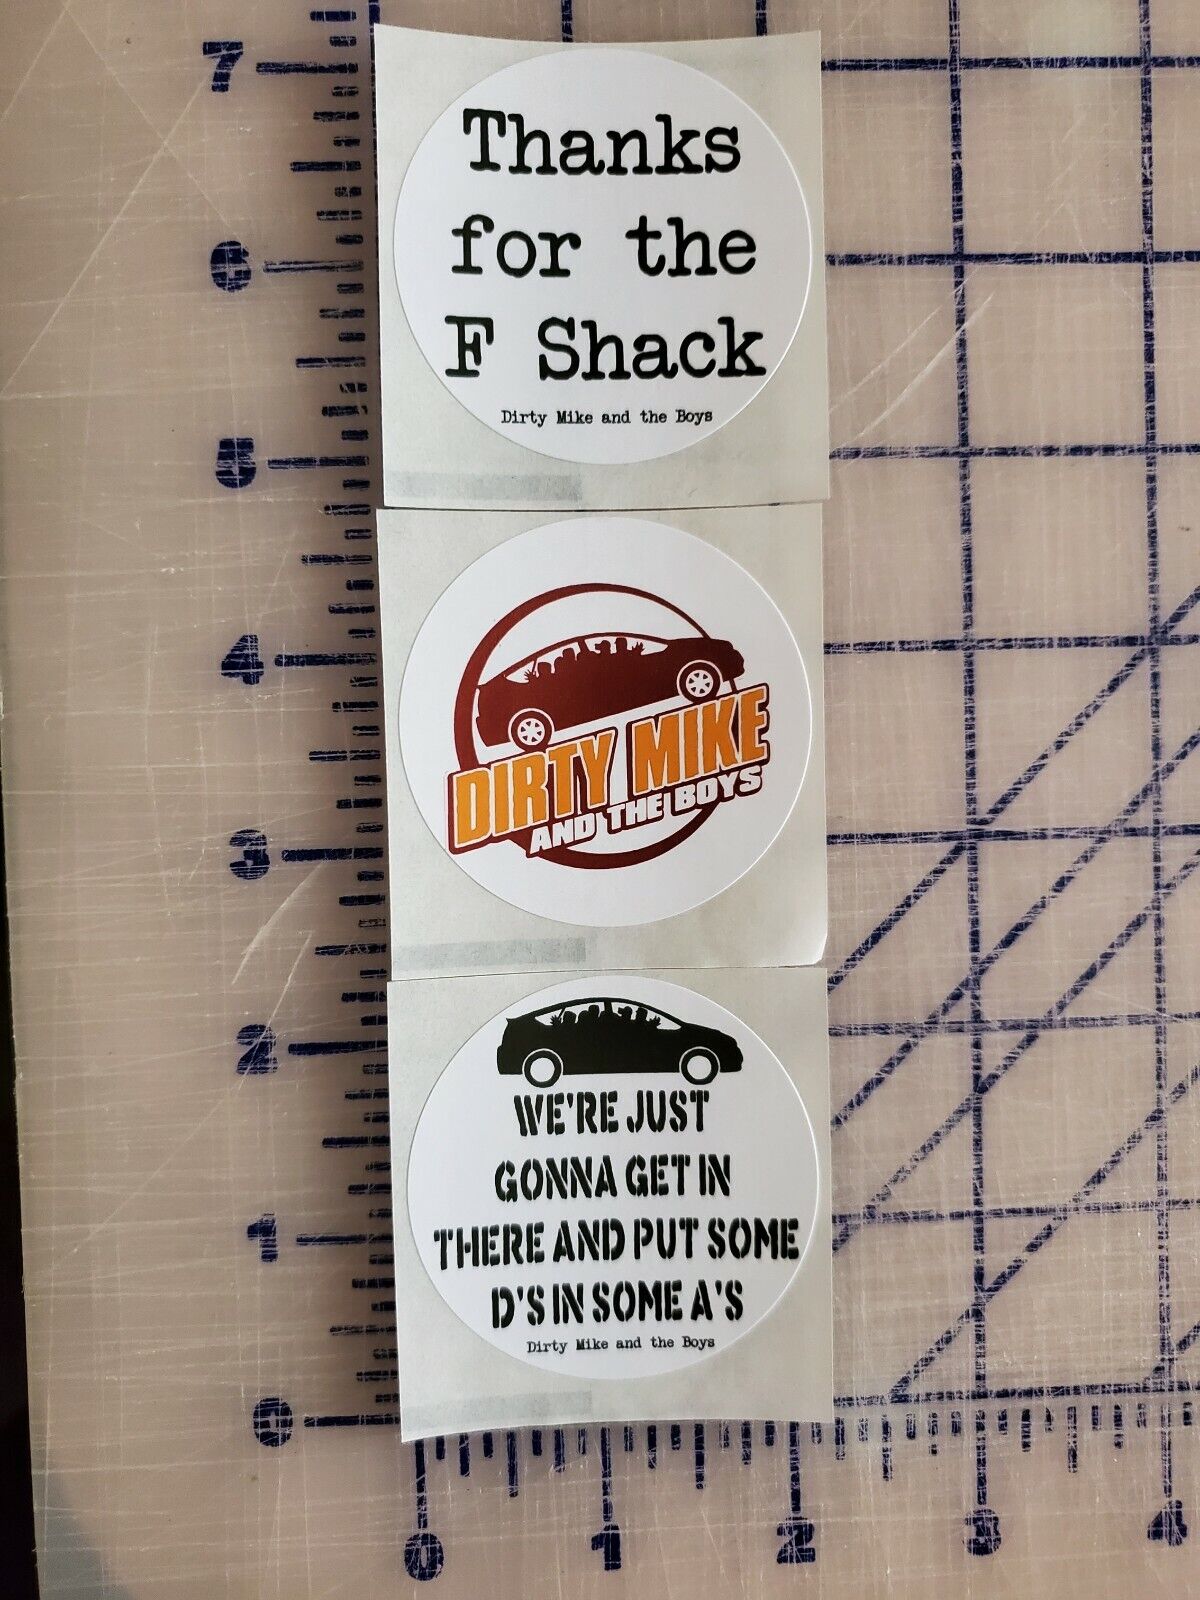 Dirty Mike and the Boys F Shack other guys paper sticker label funny 3 pack